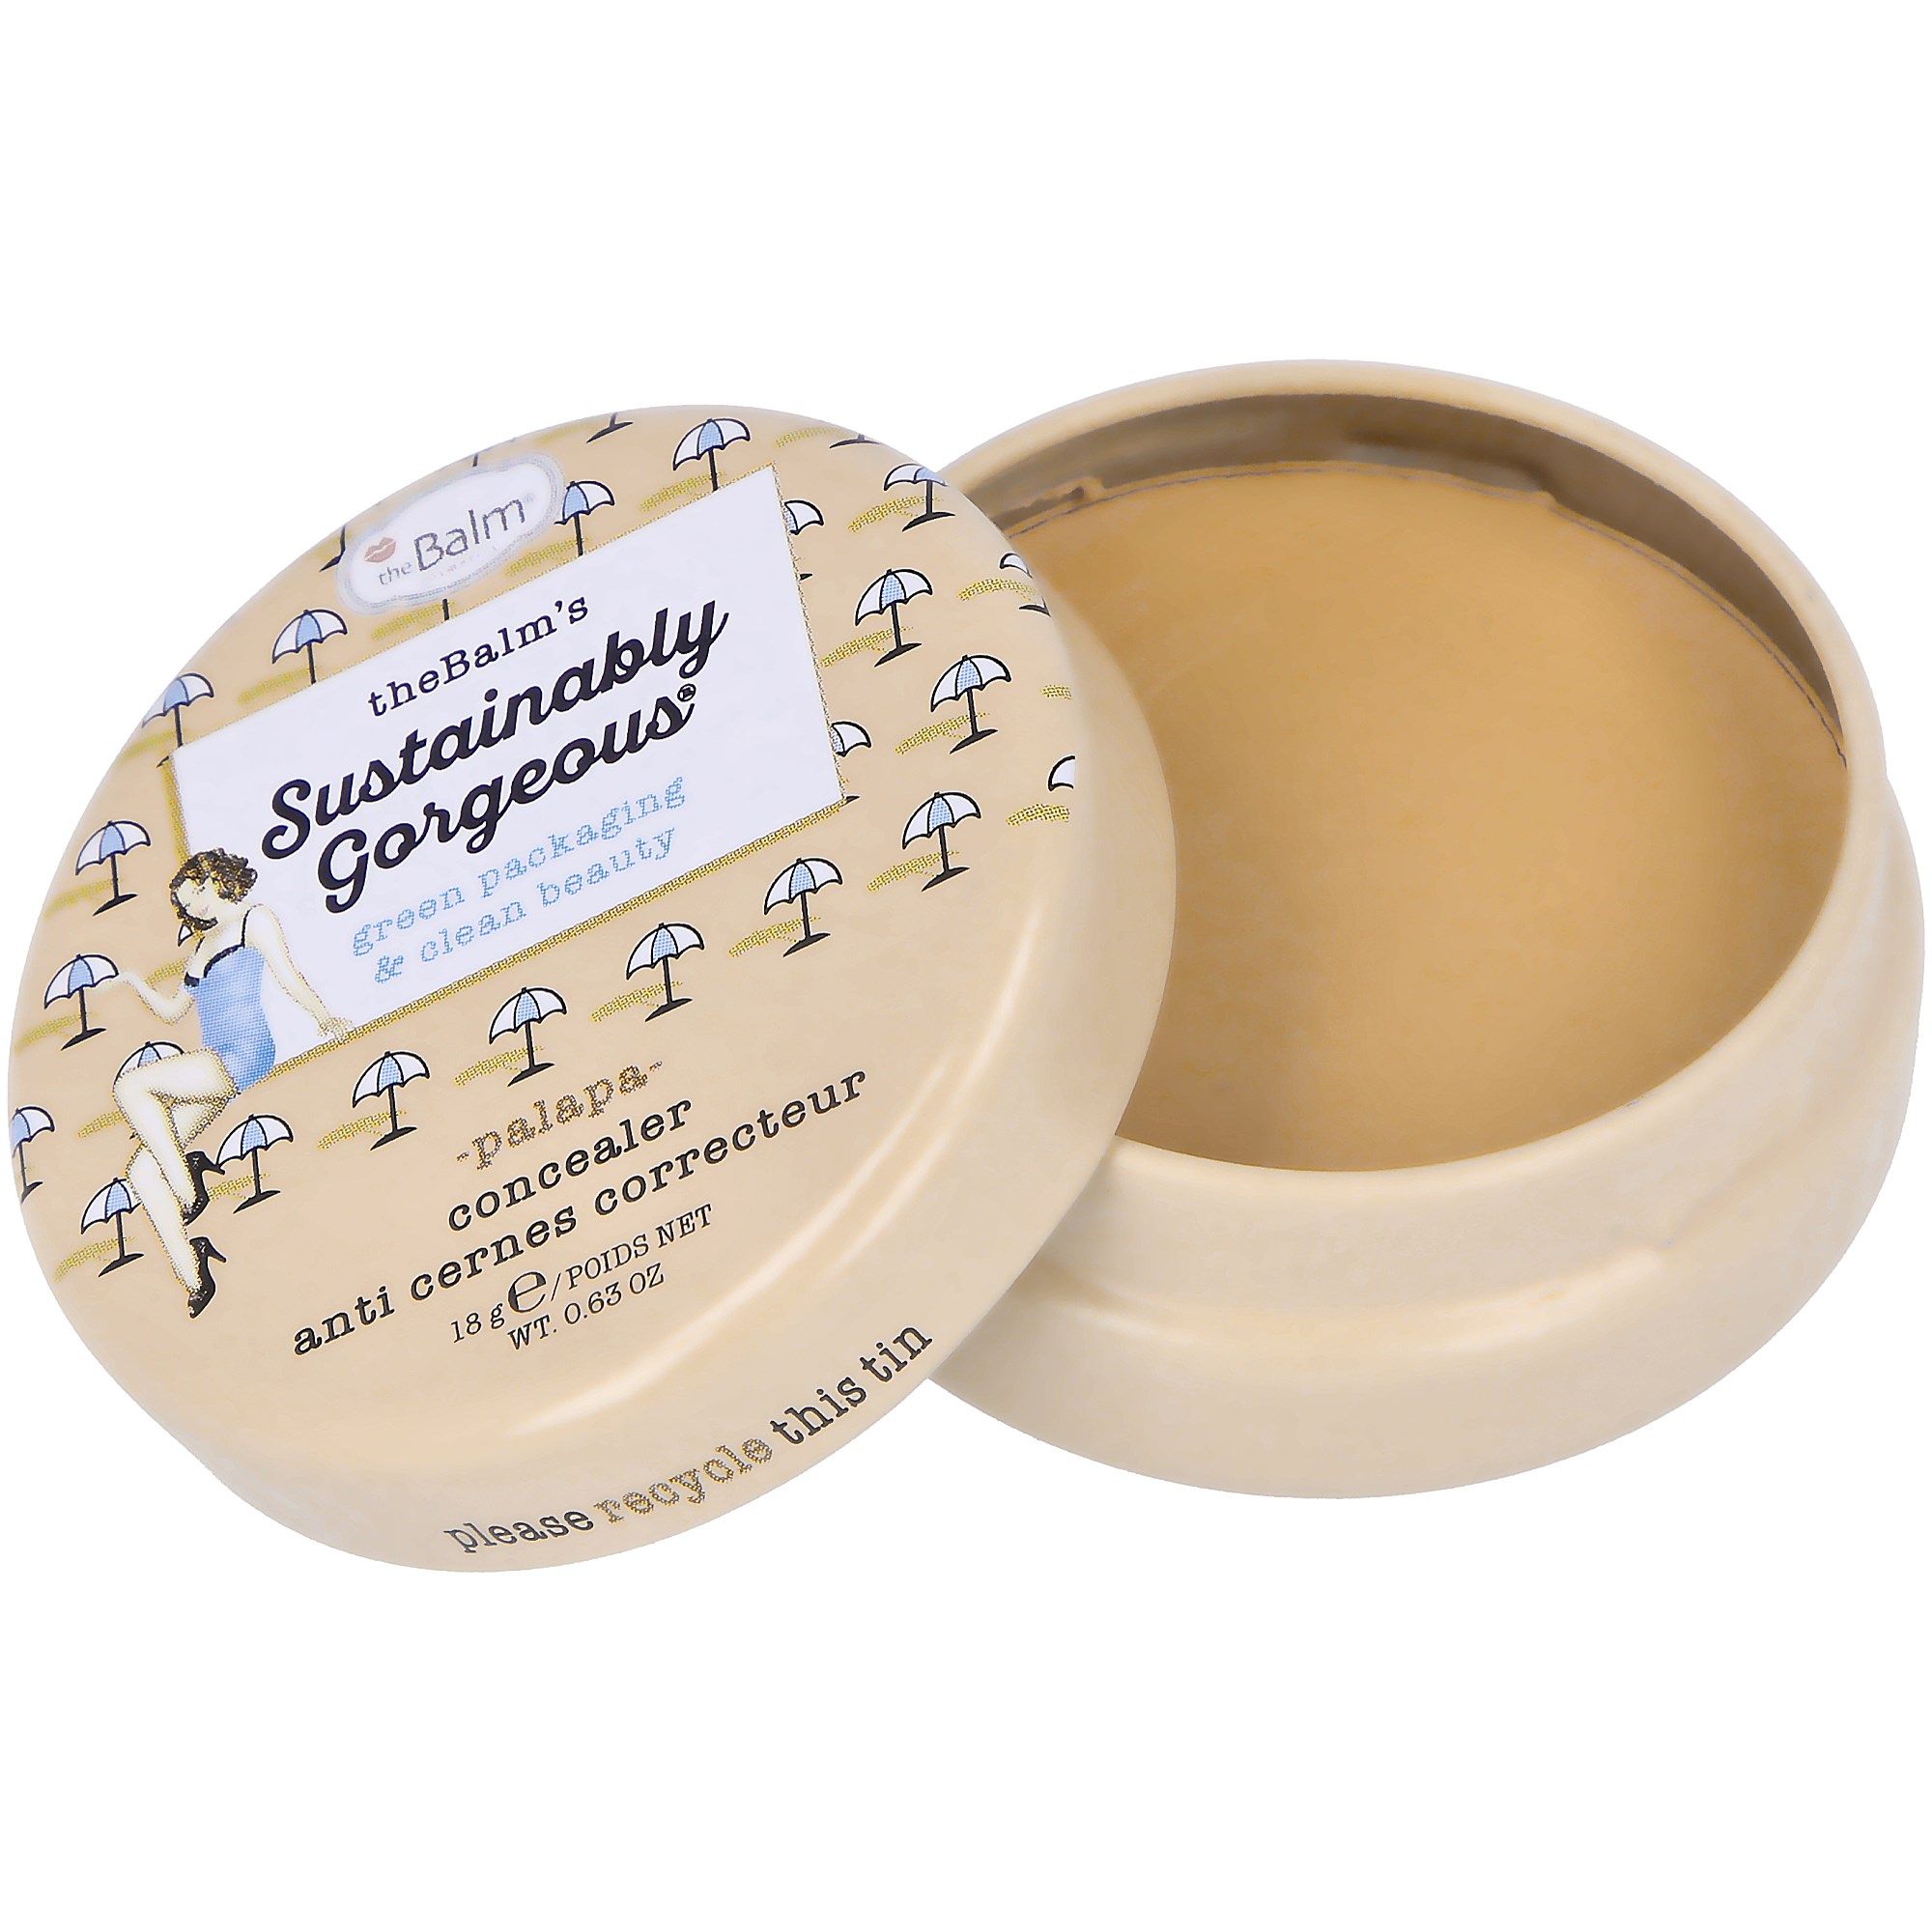 the Balm Sustainably Gorgeous Concealer Palapa